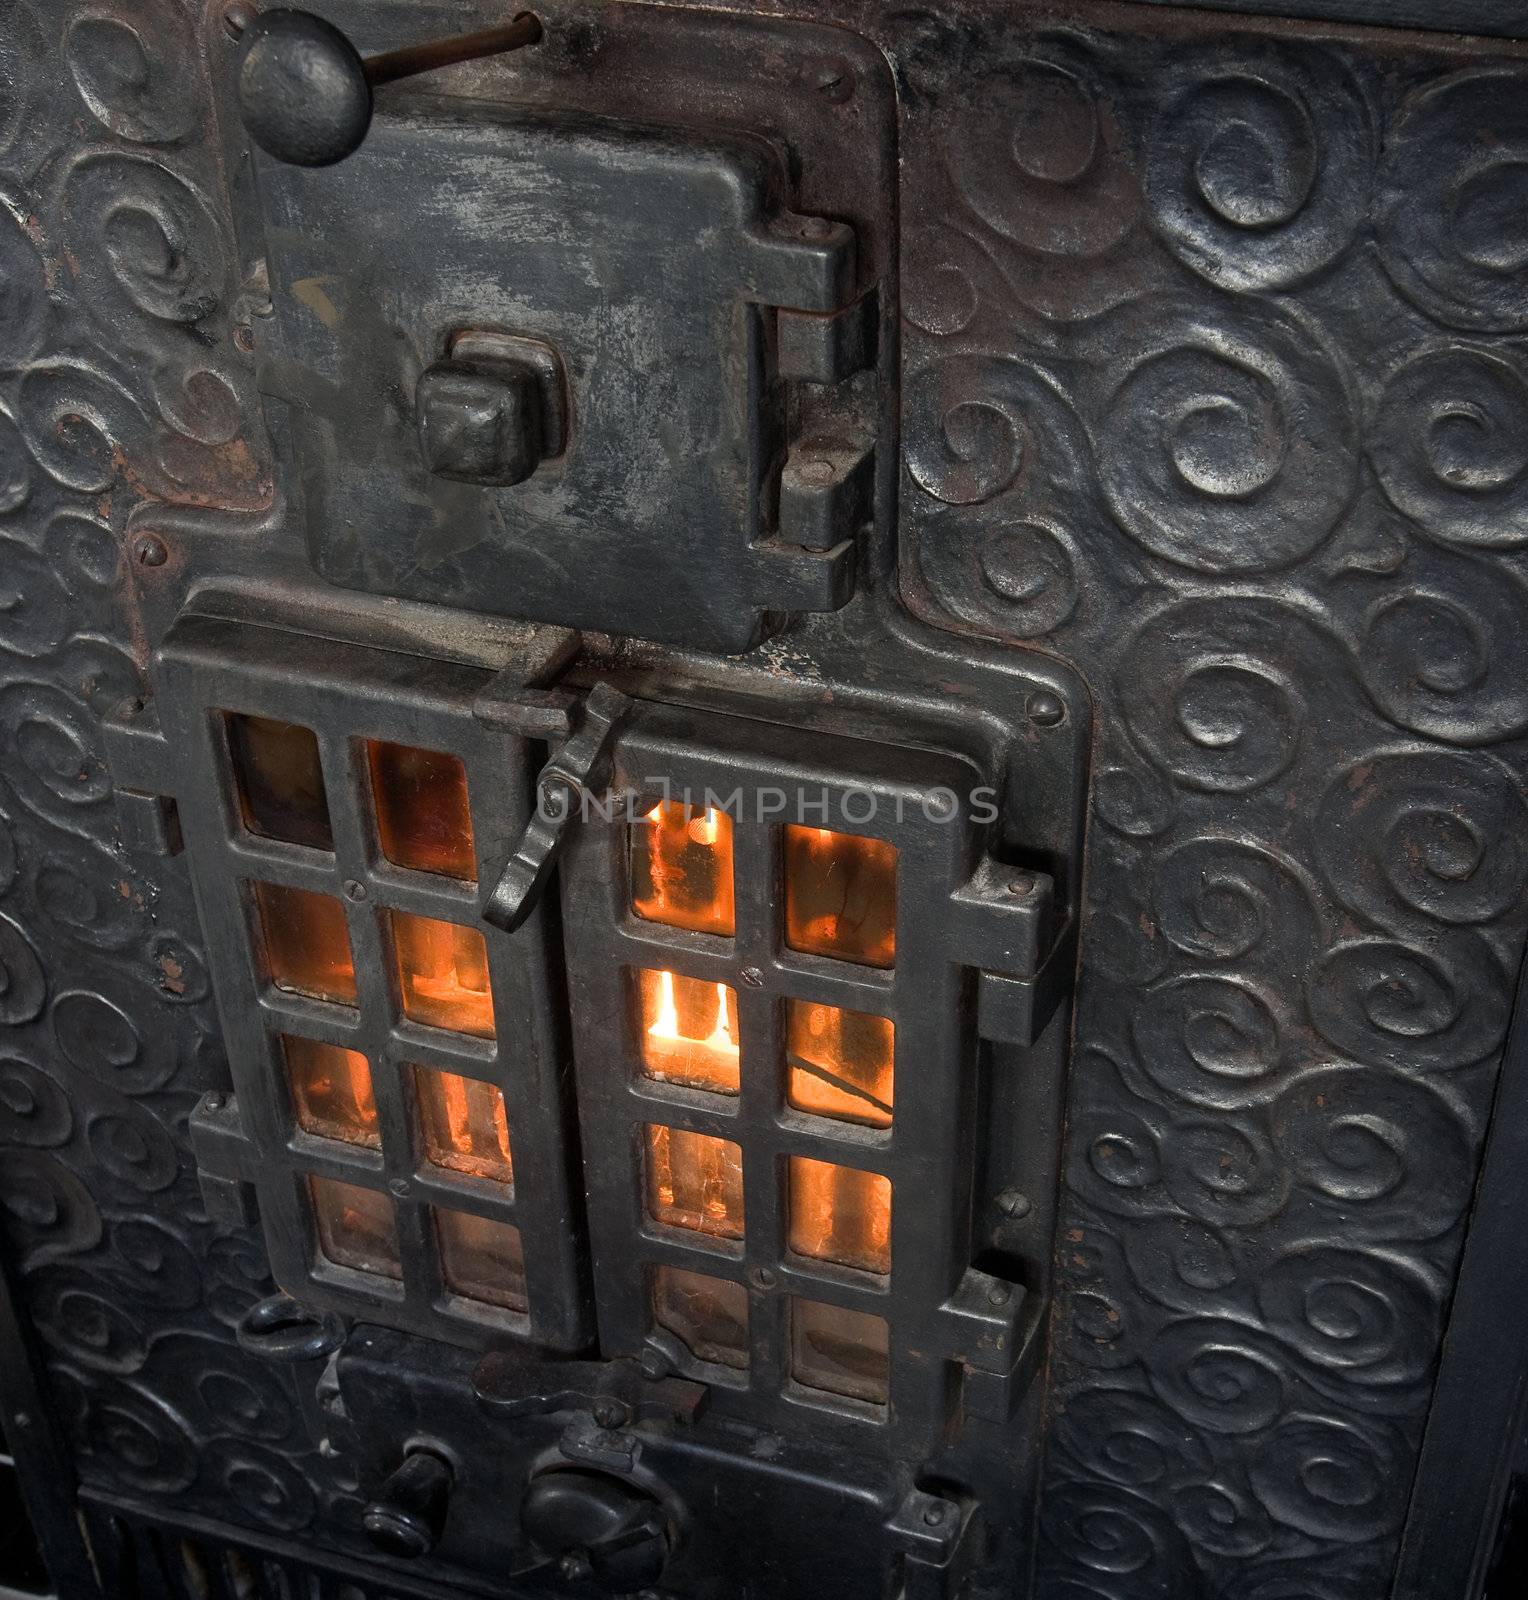 An old cast iron oven with flames viewable through the window